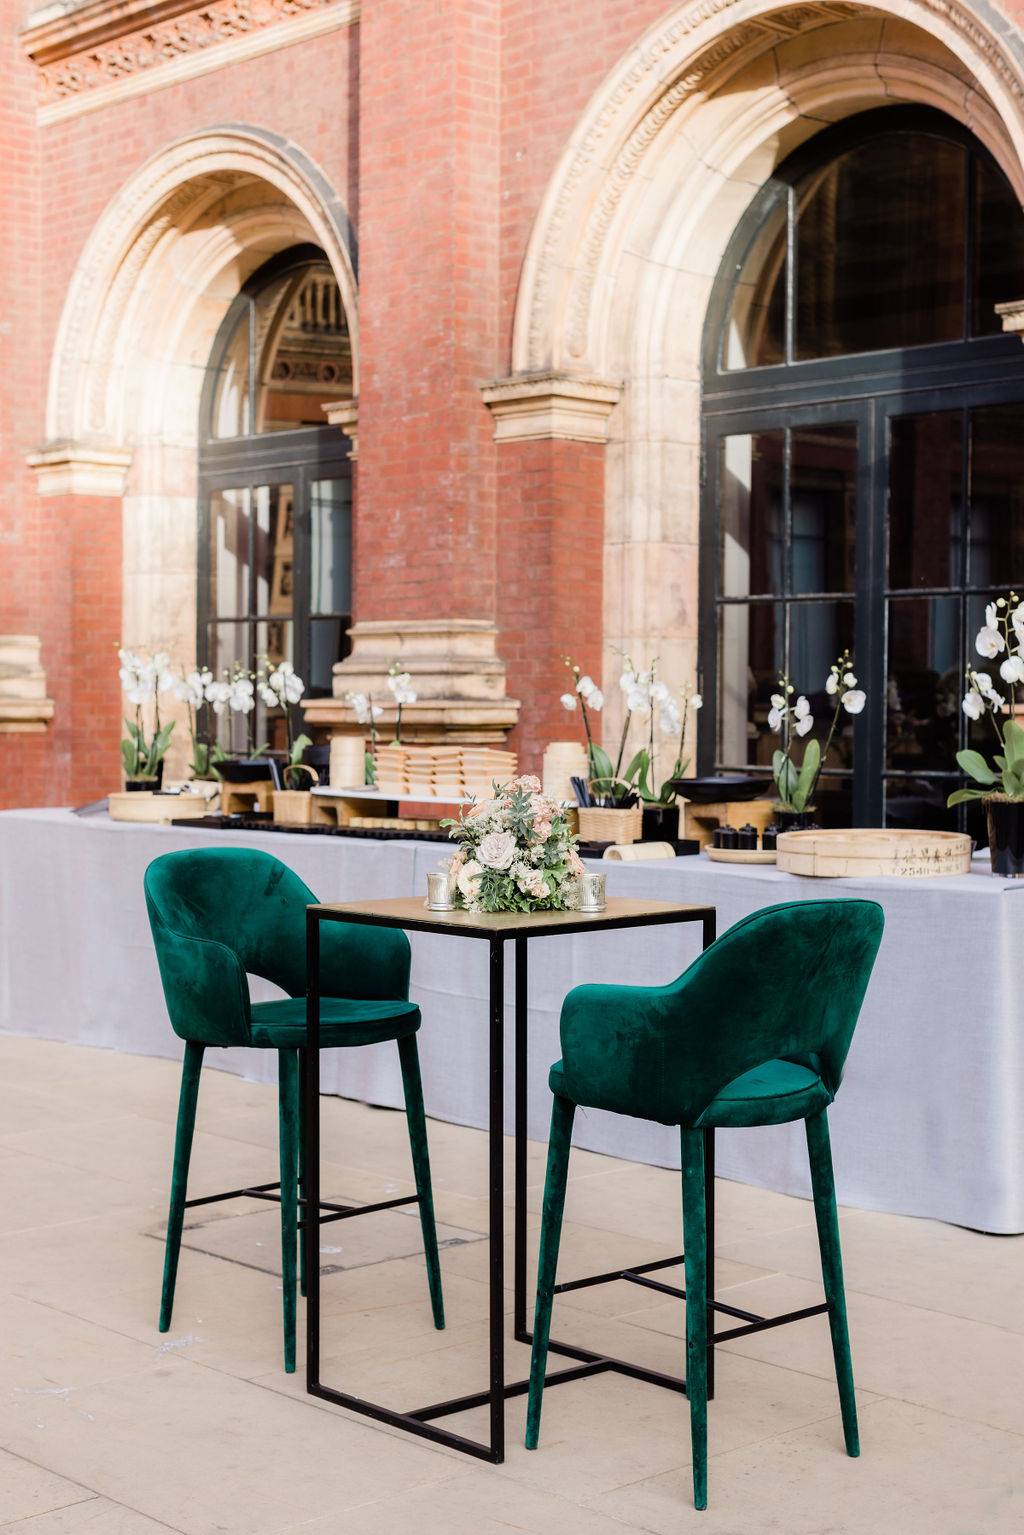 host your garden party at the Victoria and Albert 